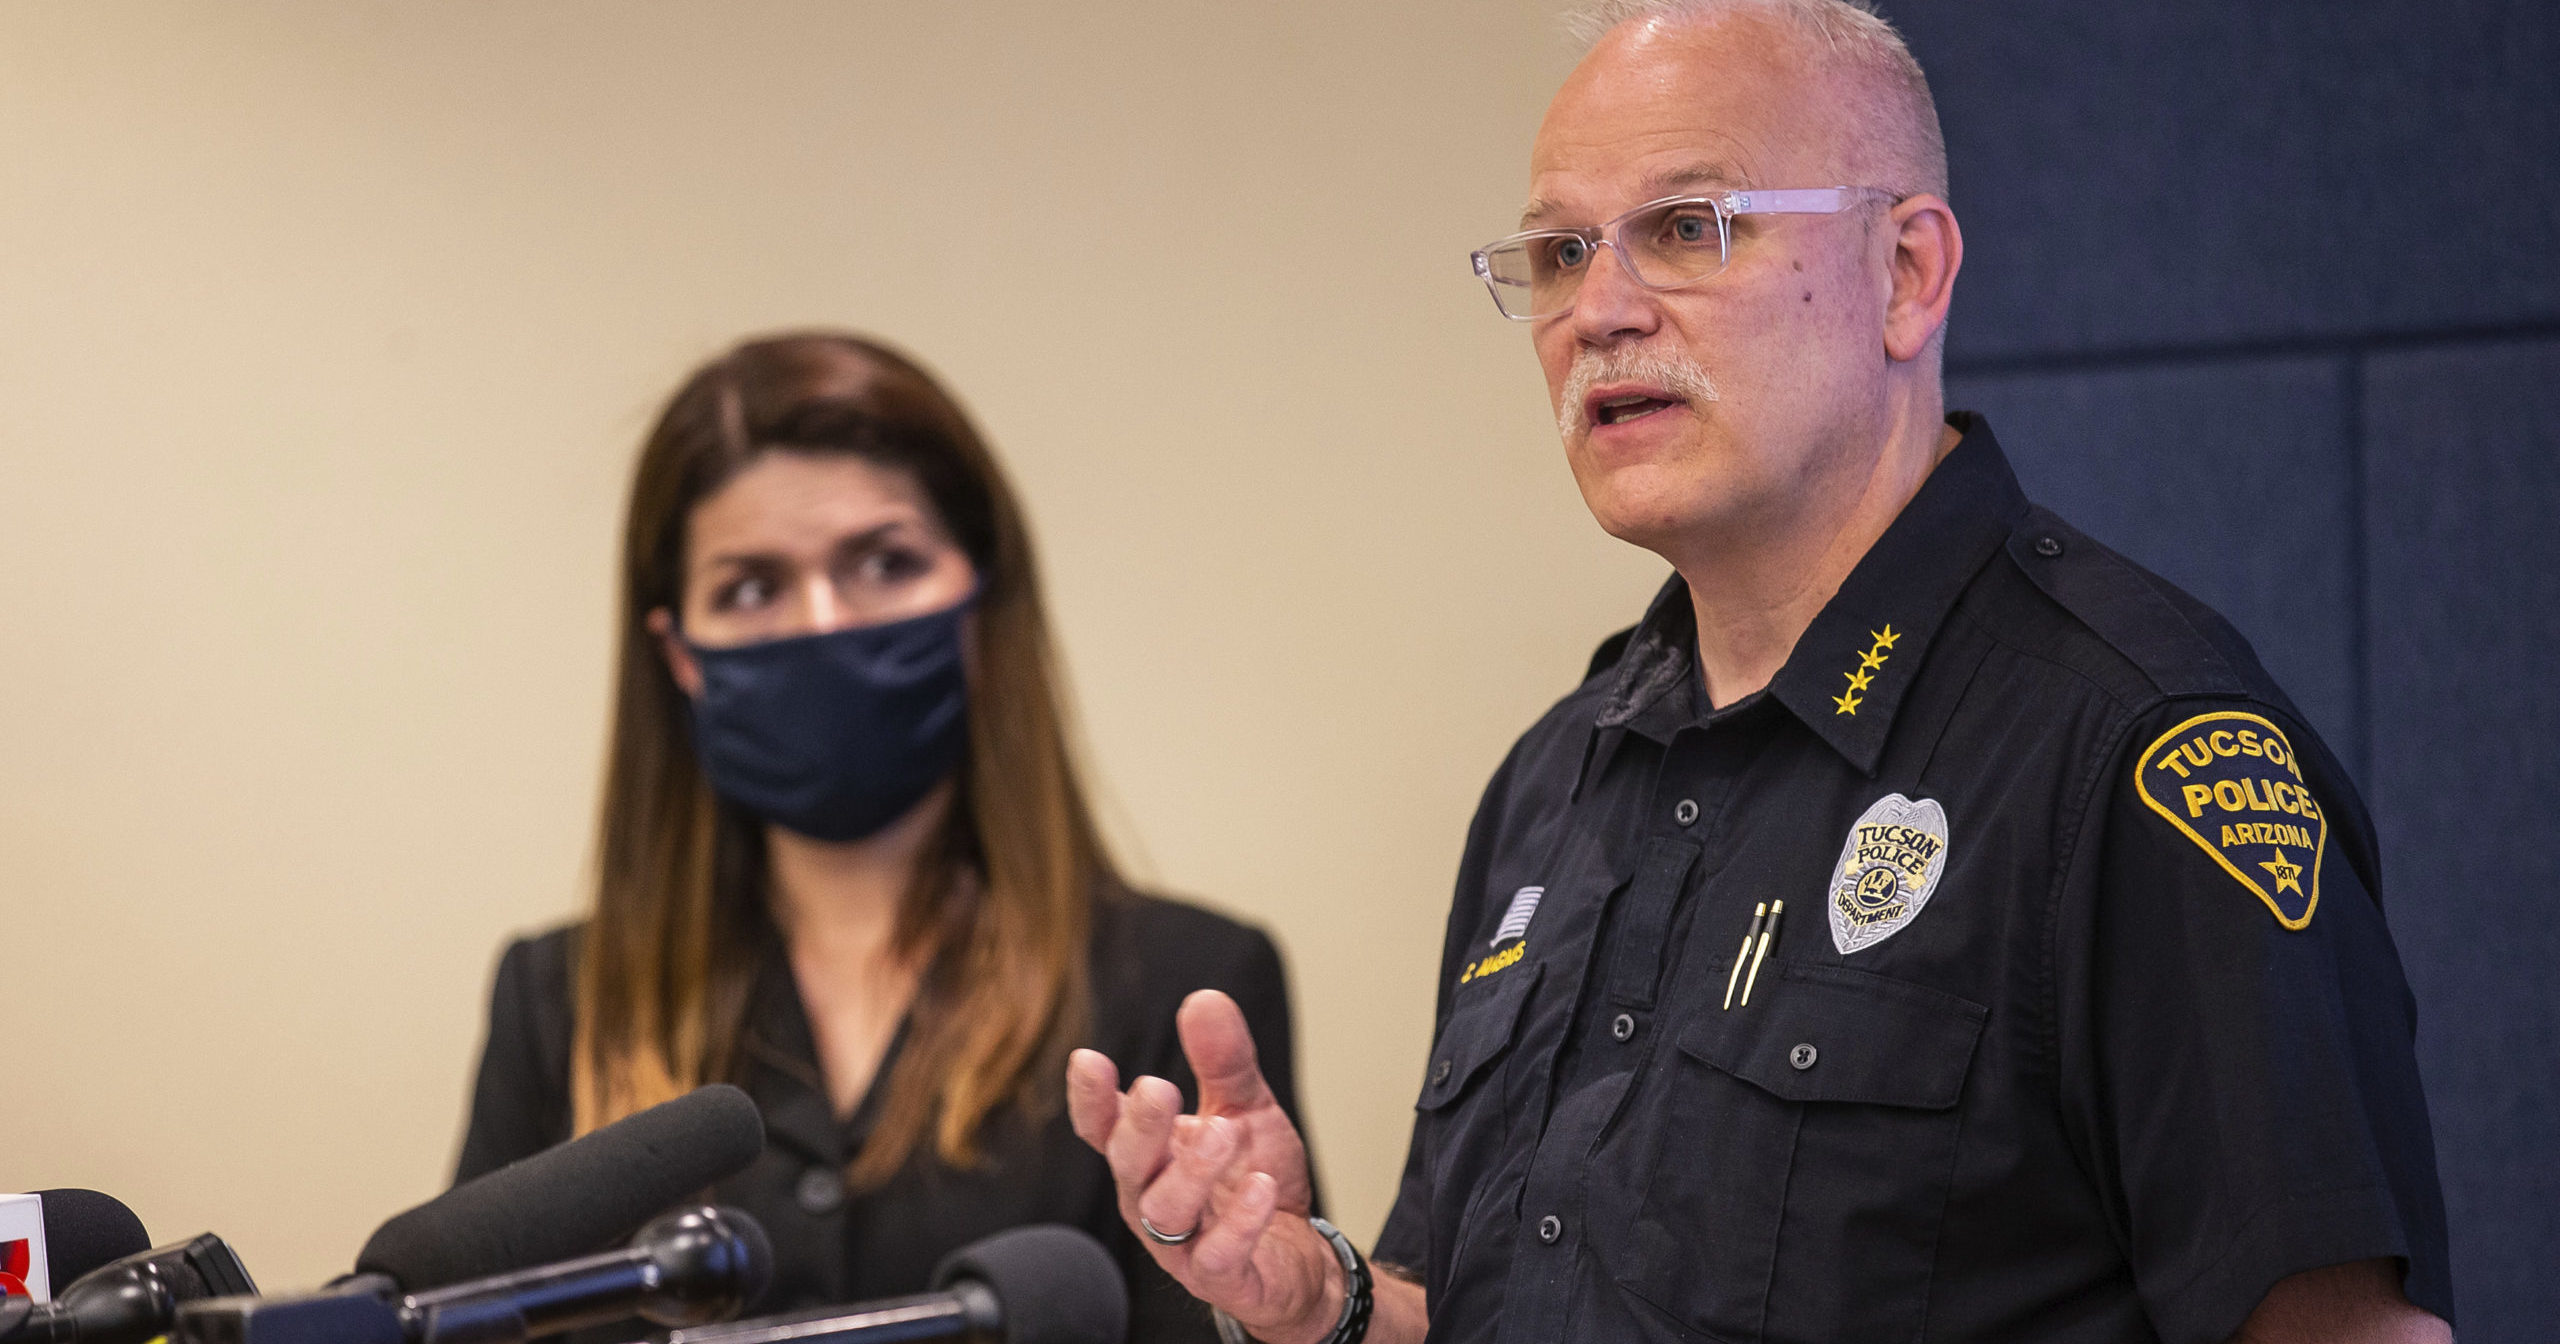 Tucson Police Chief Chris Magnus, right, speaks as Mayor Regina Romero listens during a news conference on June 24, 2020, in Tucson, Arizona. Chief Magnus offered his resignation after the death of a 27-year-old man who died in police custody. The medical examiner’s office didn’t determine a manner of death but said Carlos Ingram-Lopez died of sudden cardiac arrest while intoxicated by cocaine and physically restrained.